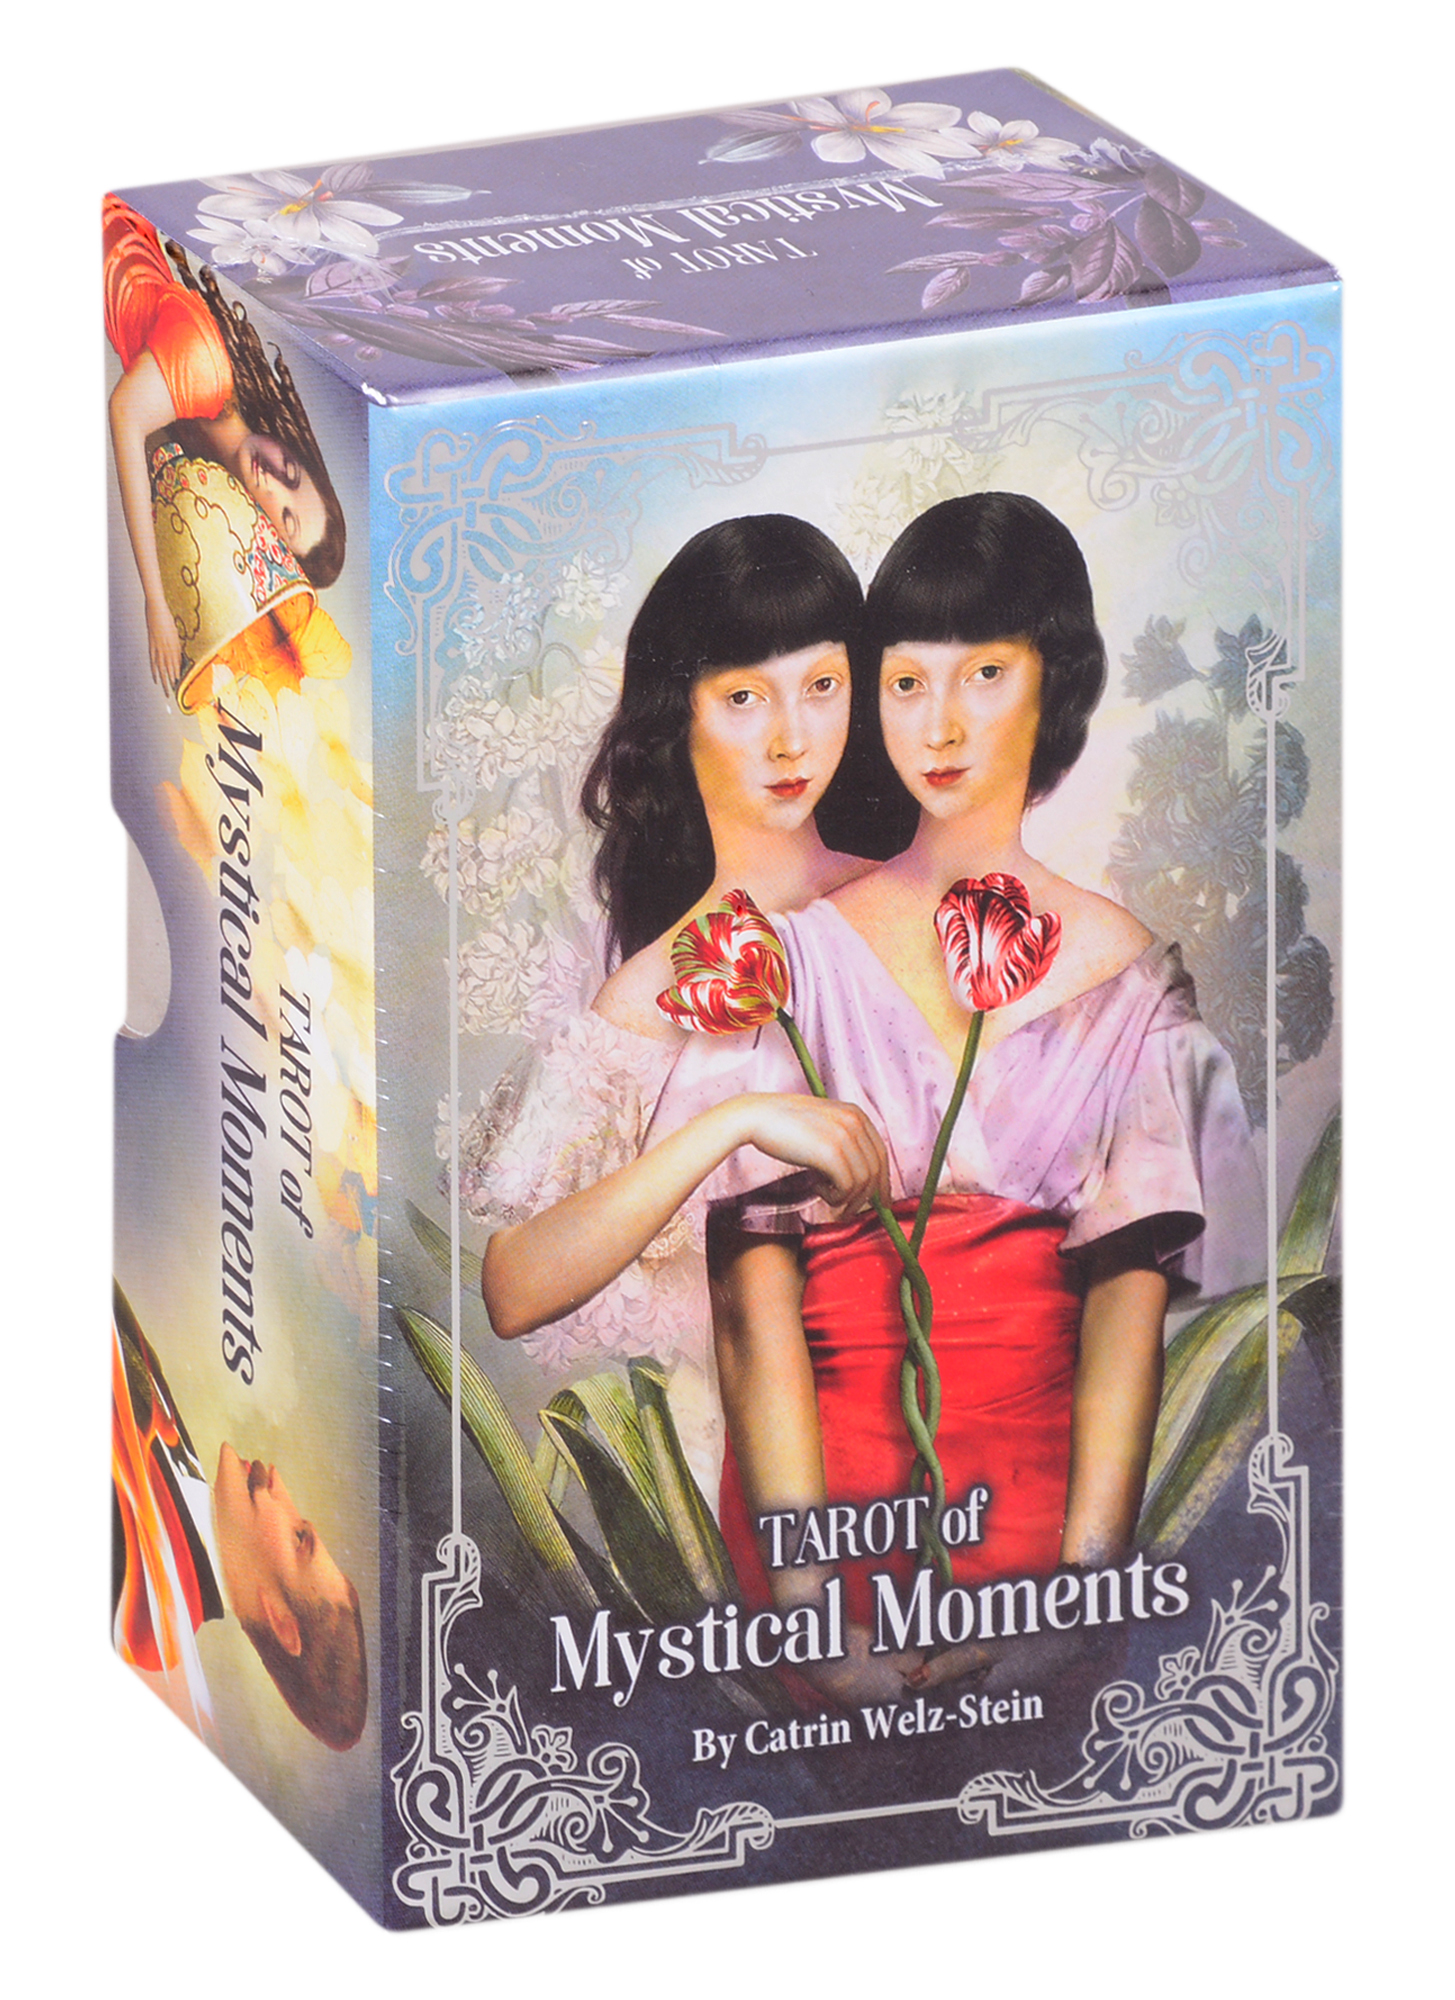 Tarot of Mystical Moments (96 карт) popular great doreen virtue angel series oracle cards archangel gabriel cards tarot cards for beginners with pdf guidebook